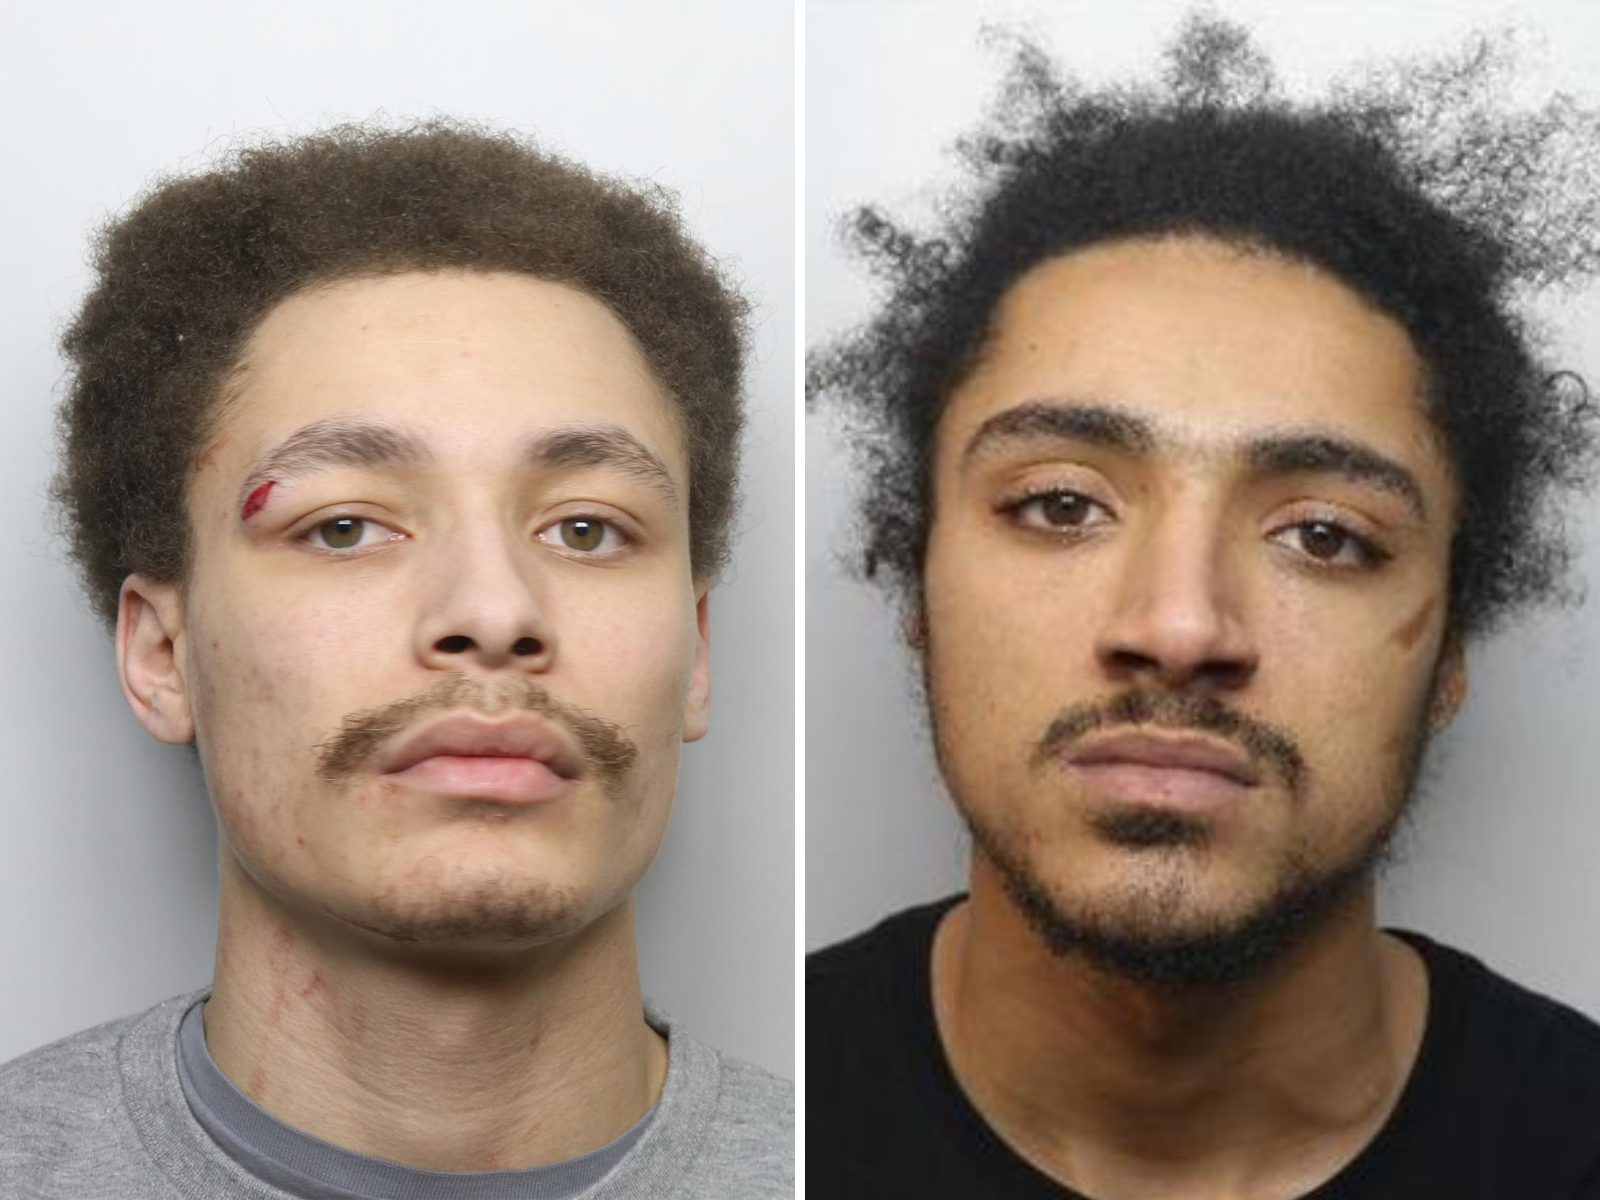 22-year-old Emile Riggan and 29-year-old Louis Grant (AKA O’Brien). Image: West Yorkshire Police